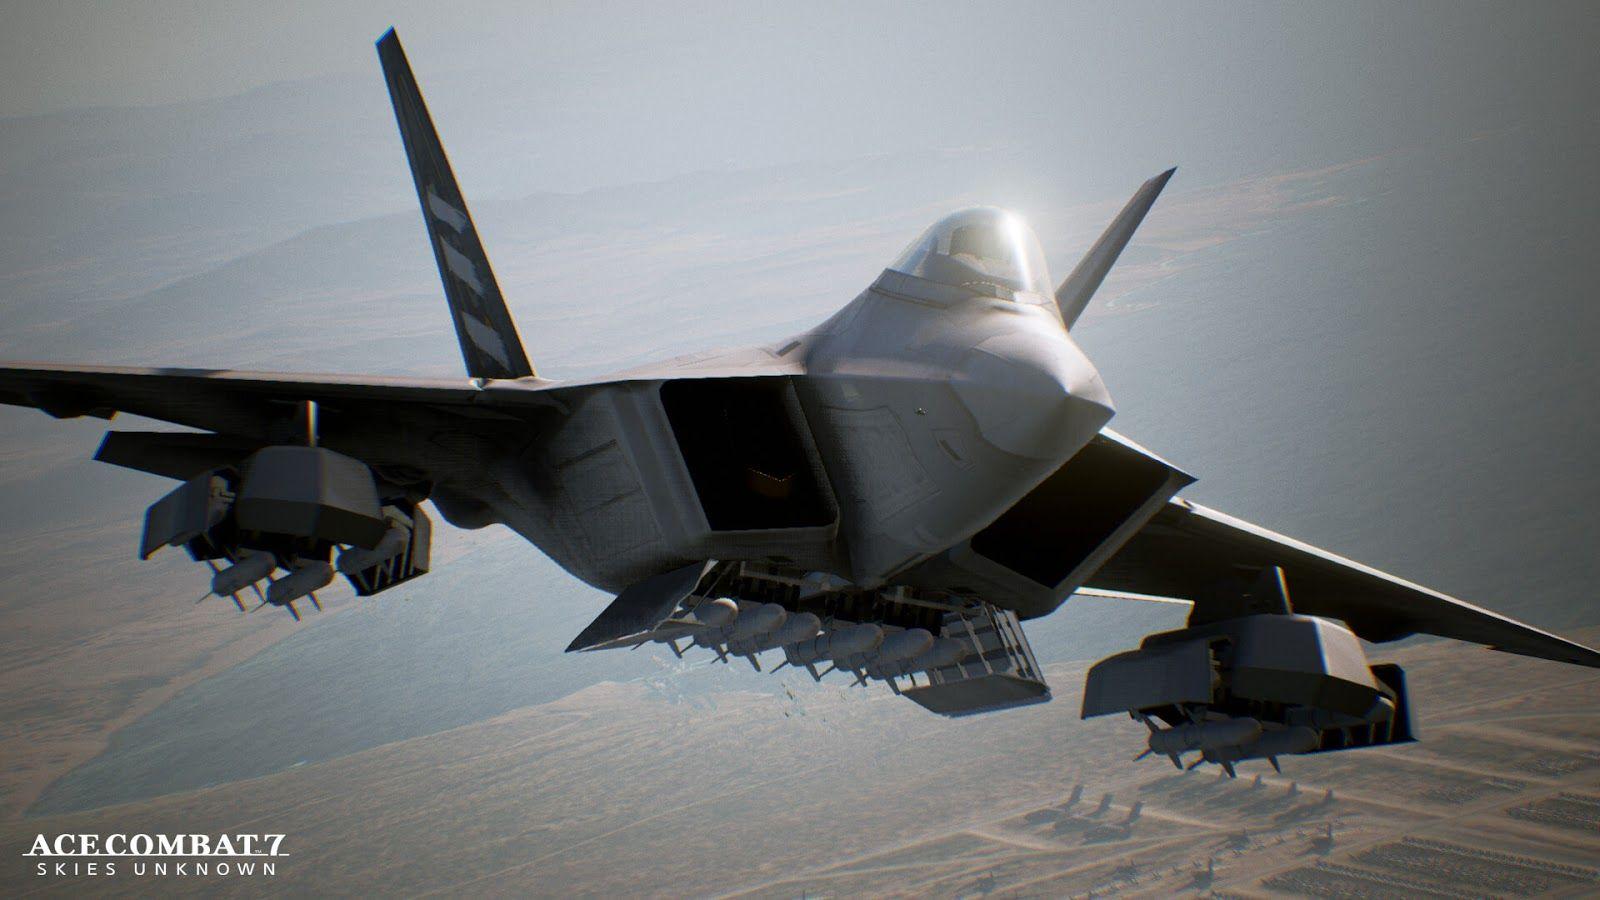 New Details Revealed For Ace Combat 7: Skies Unknown